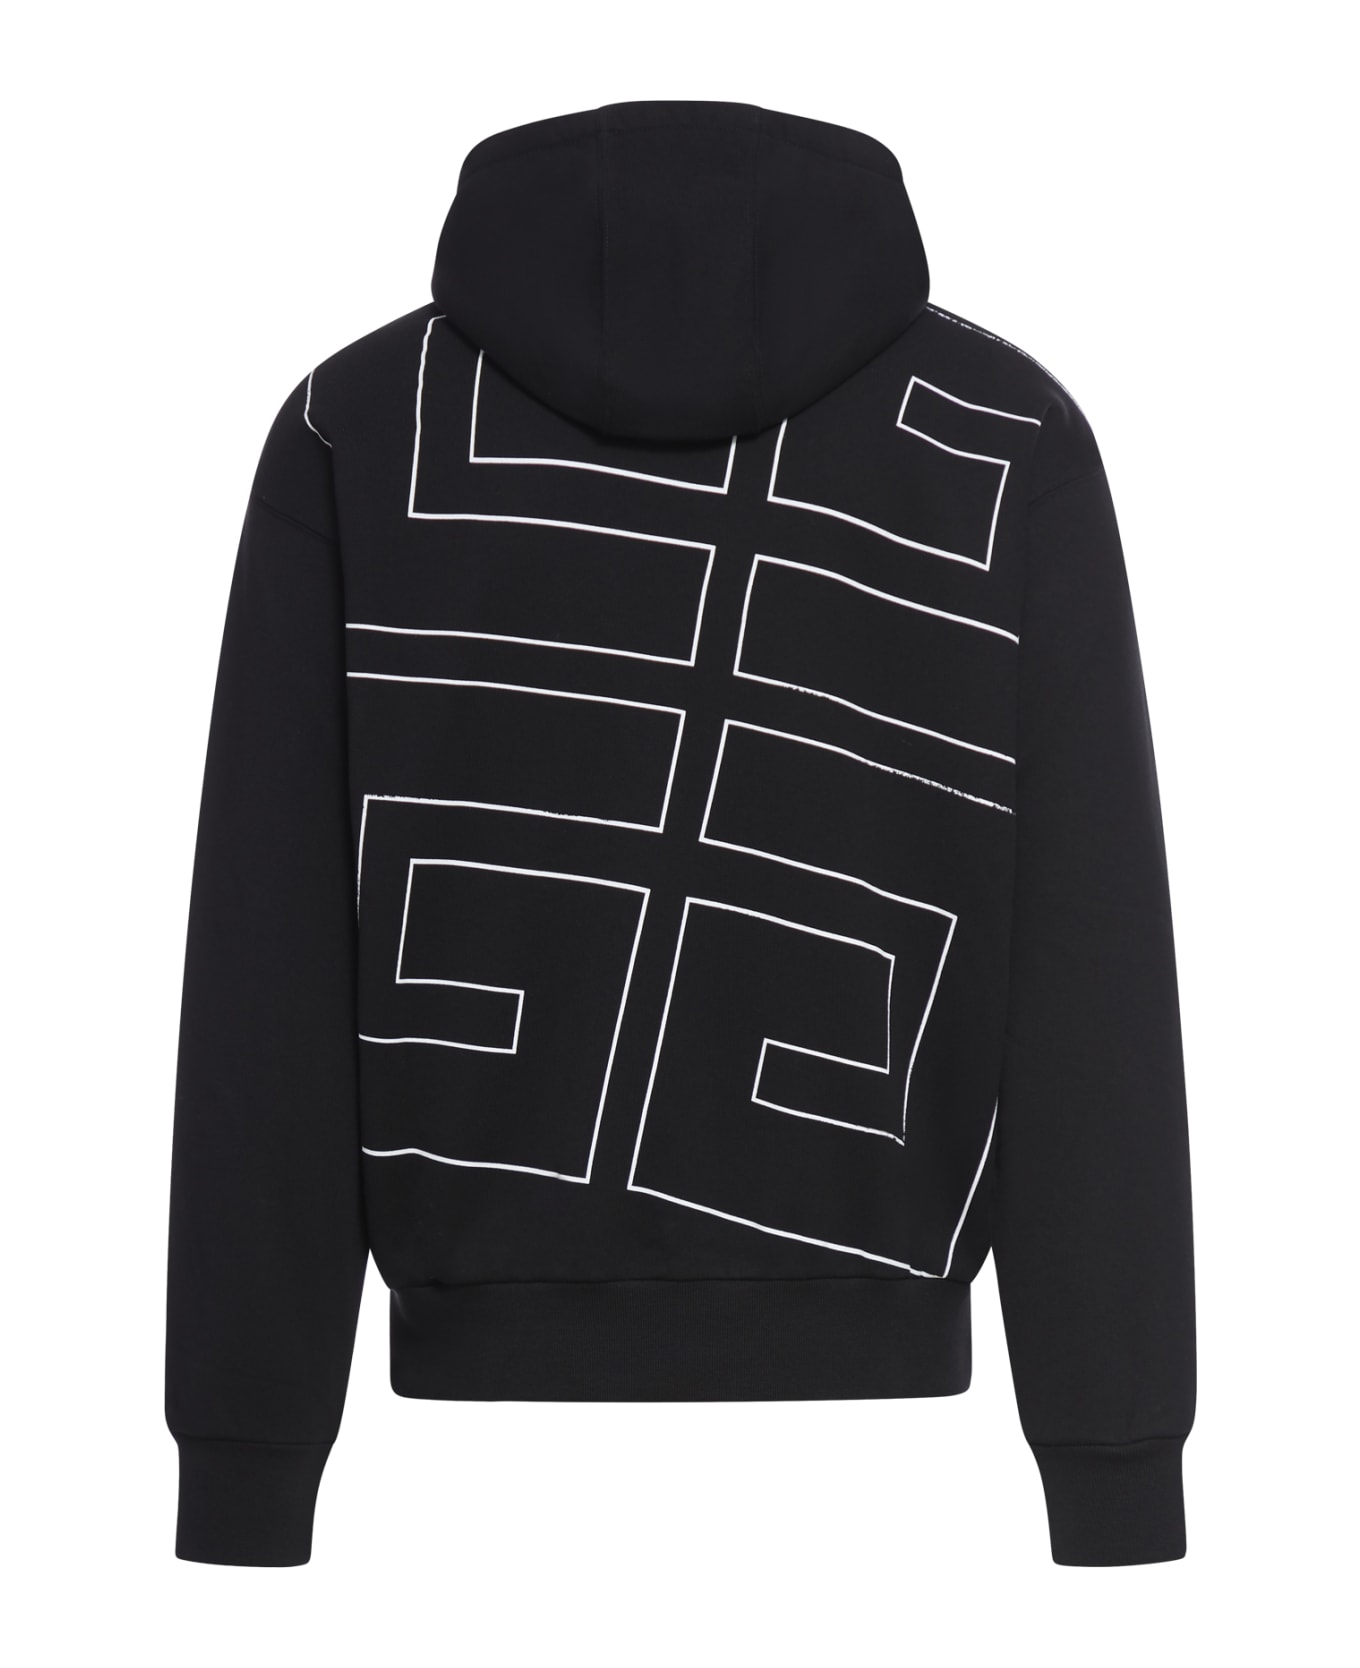 Givenchy Boxy Fit Hoodie With Pocket Base - Black